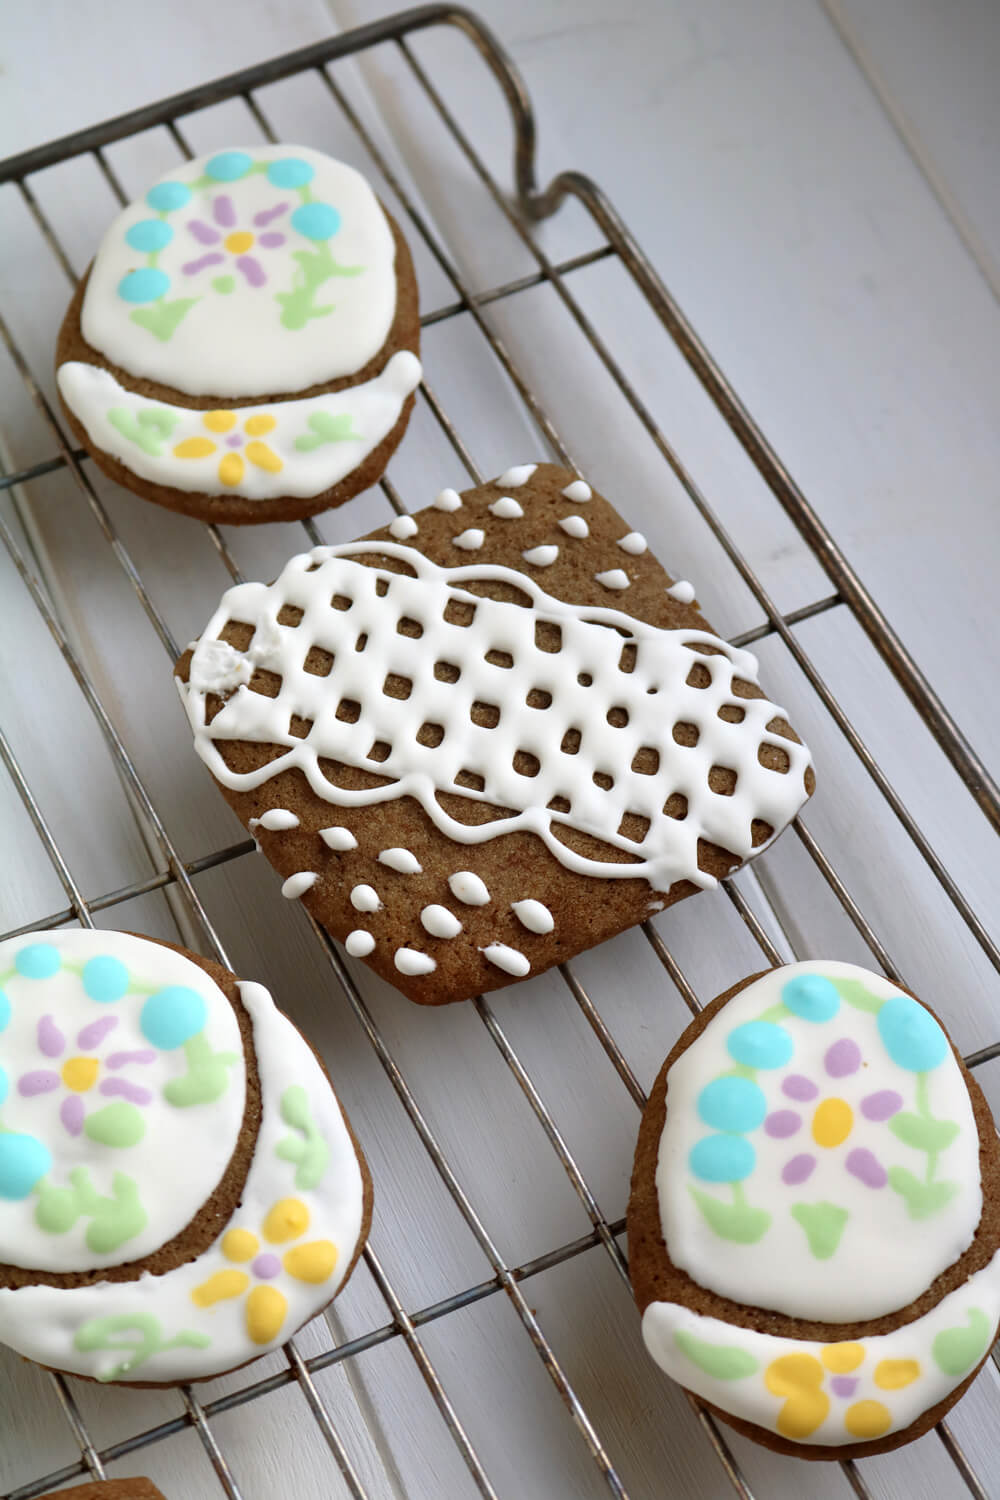 Iced Ginger Biscuits | Bake Off Bake Along | Hungry Little Bear